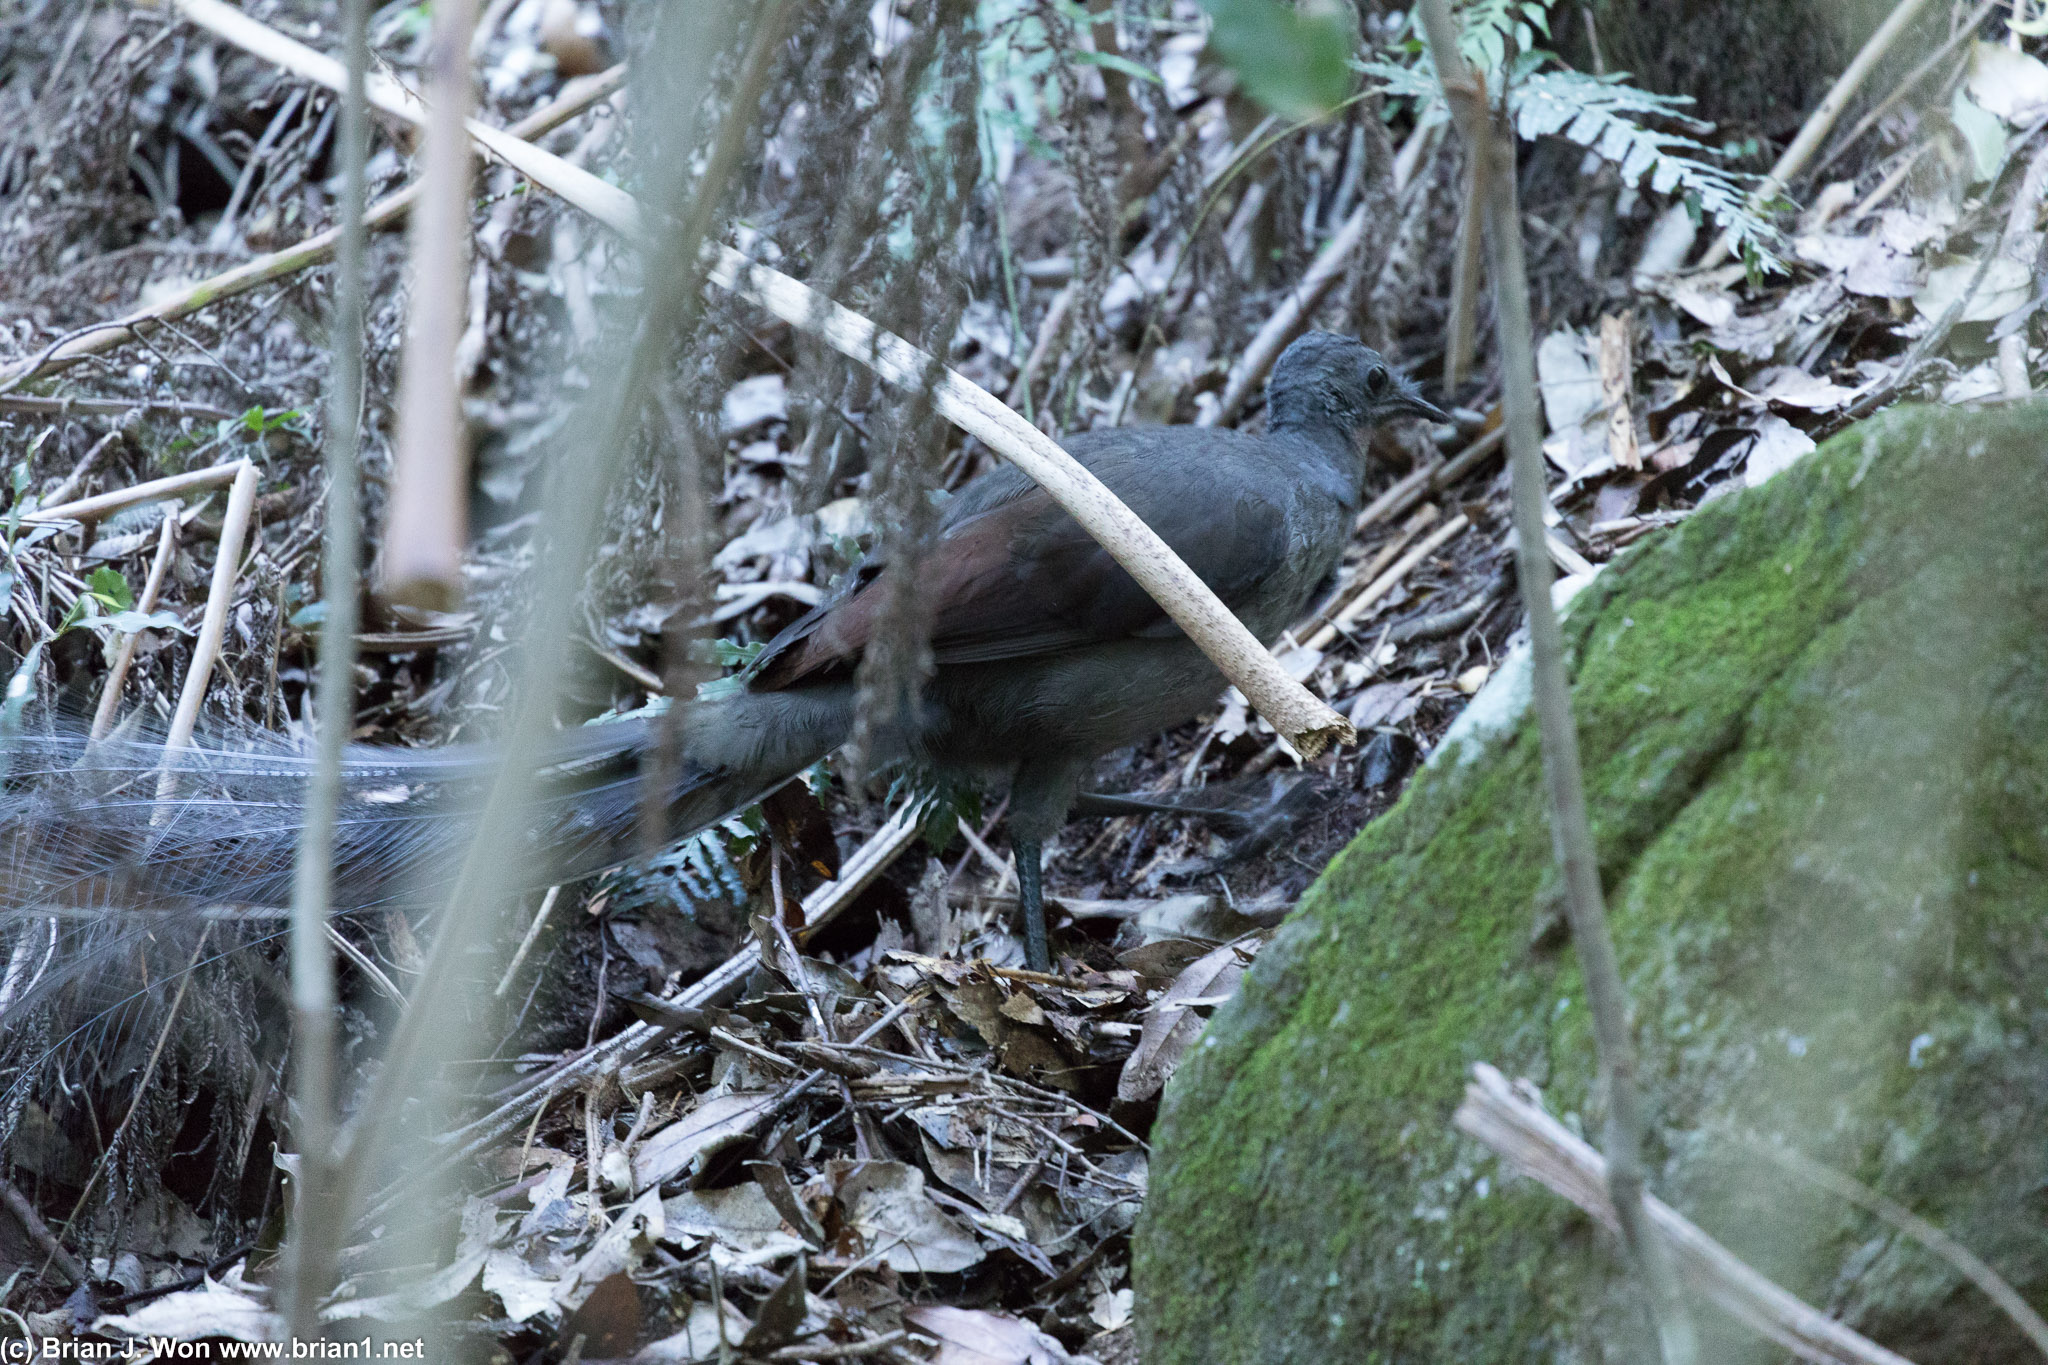 Superb lyrebird. Saw two within 30 feet of each other. Amazing.